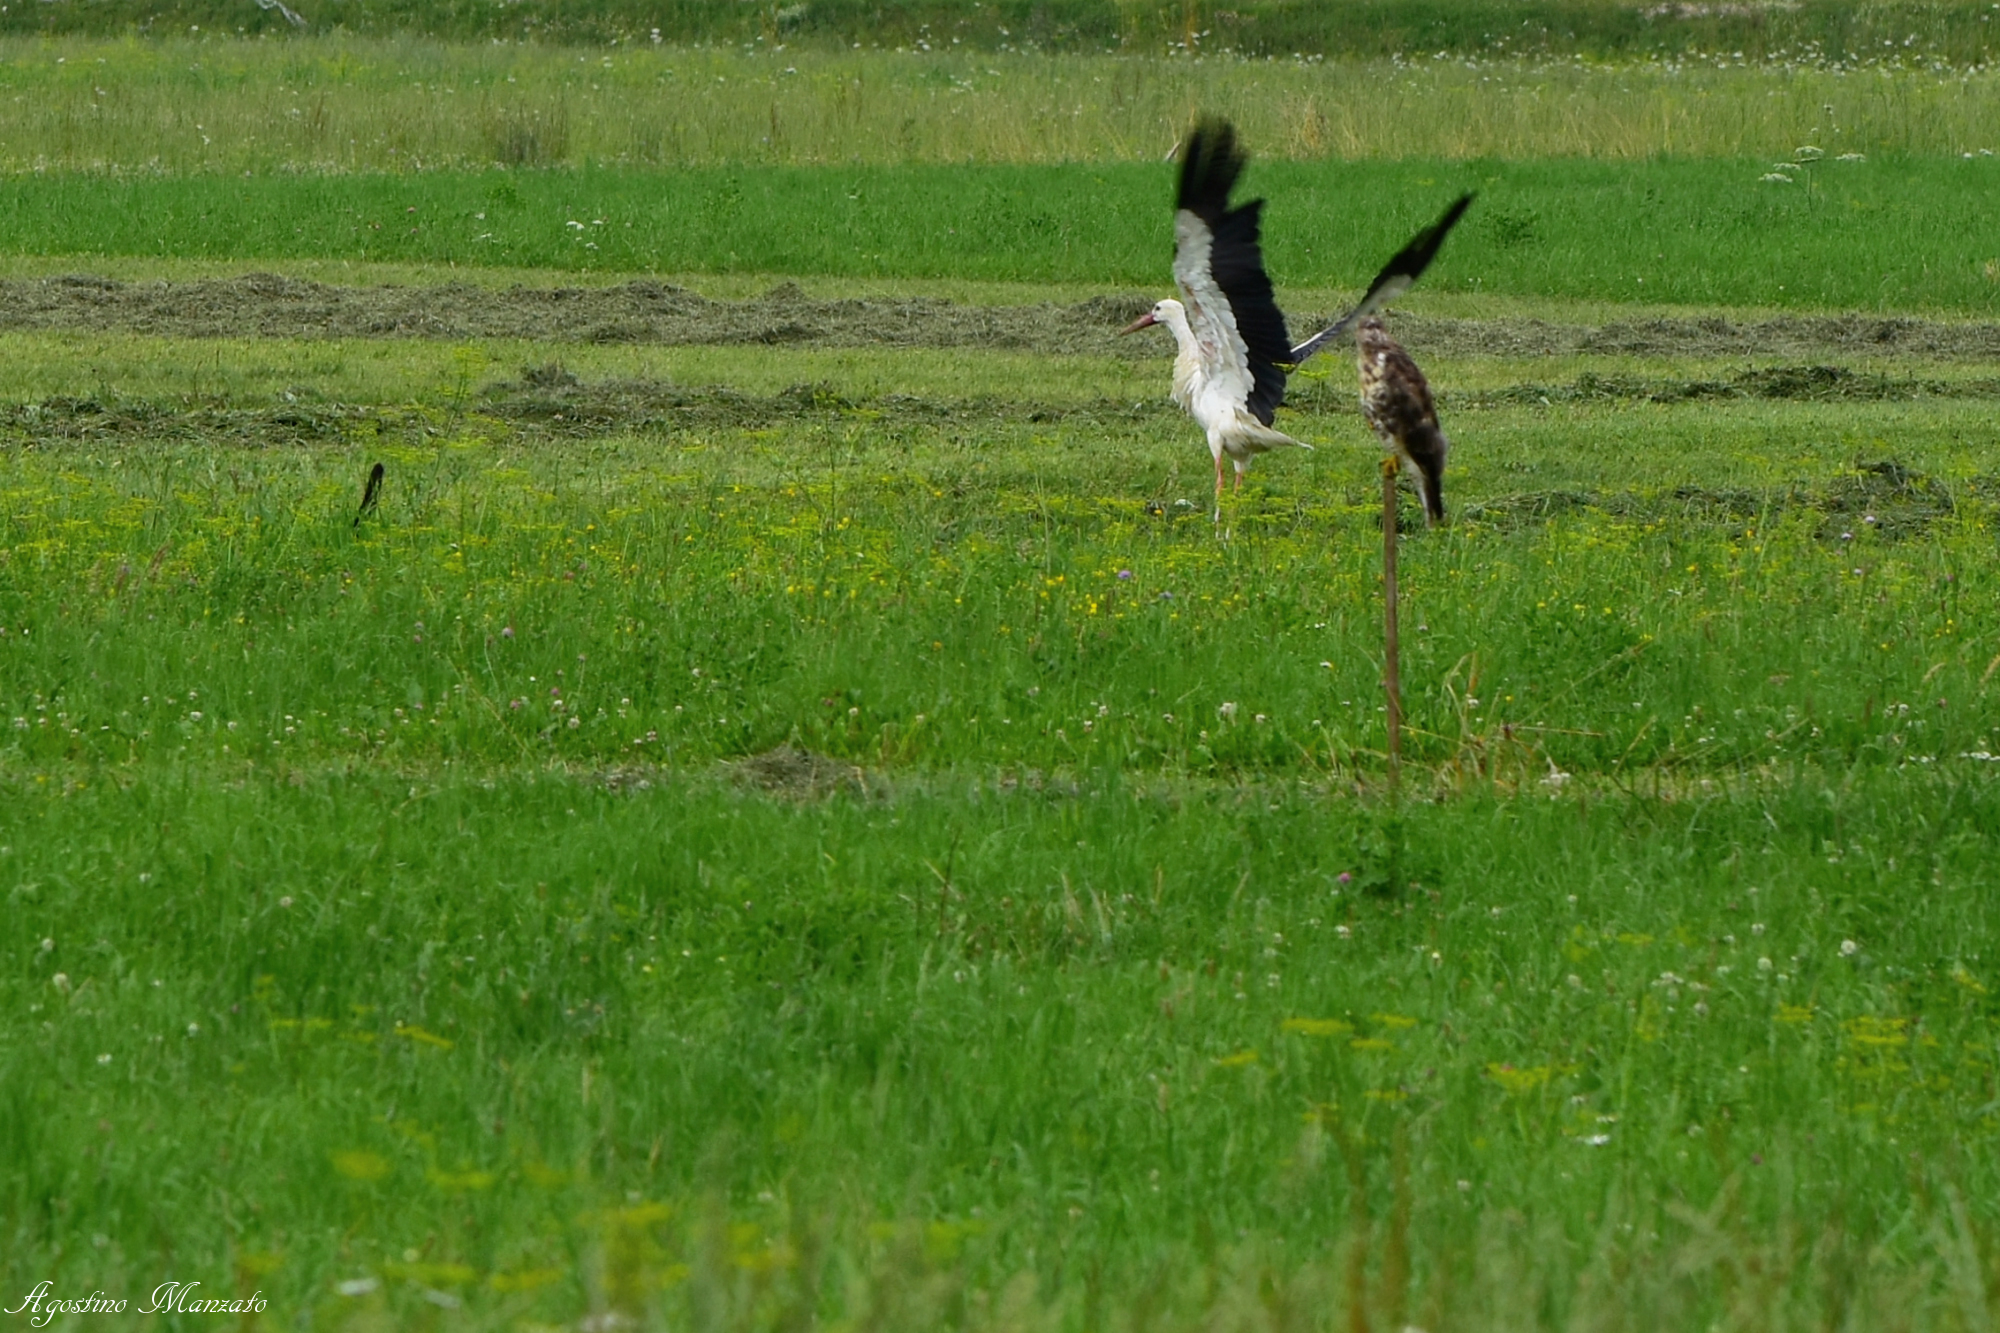 Cat tends to ambush the stork observed by the Hawk...